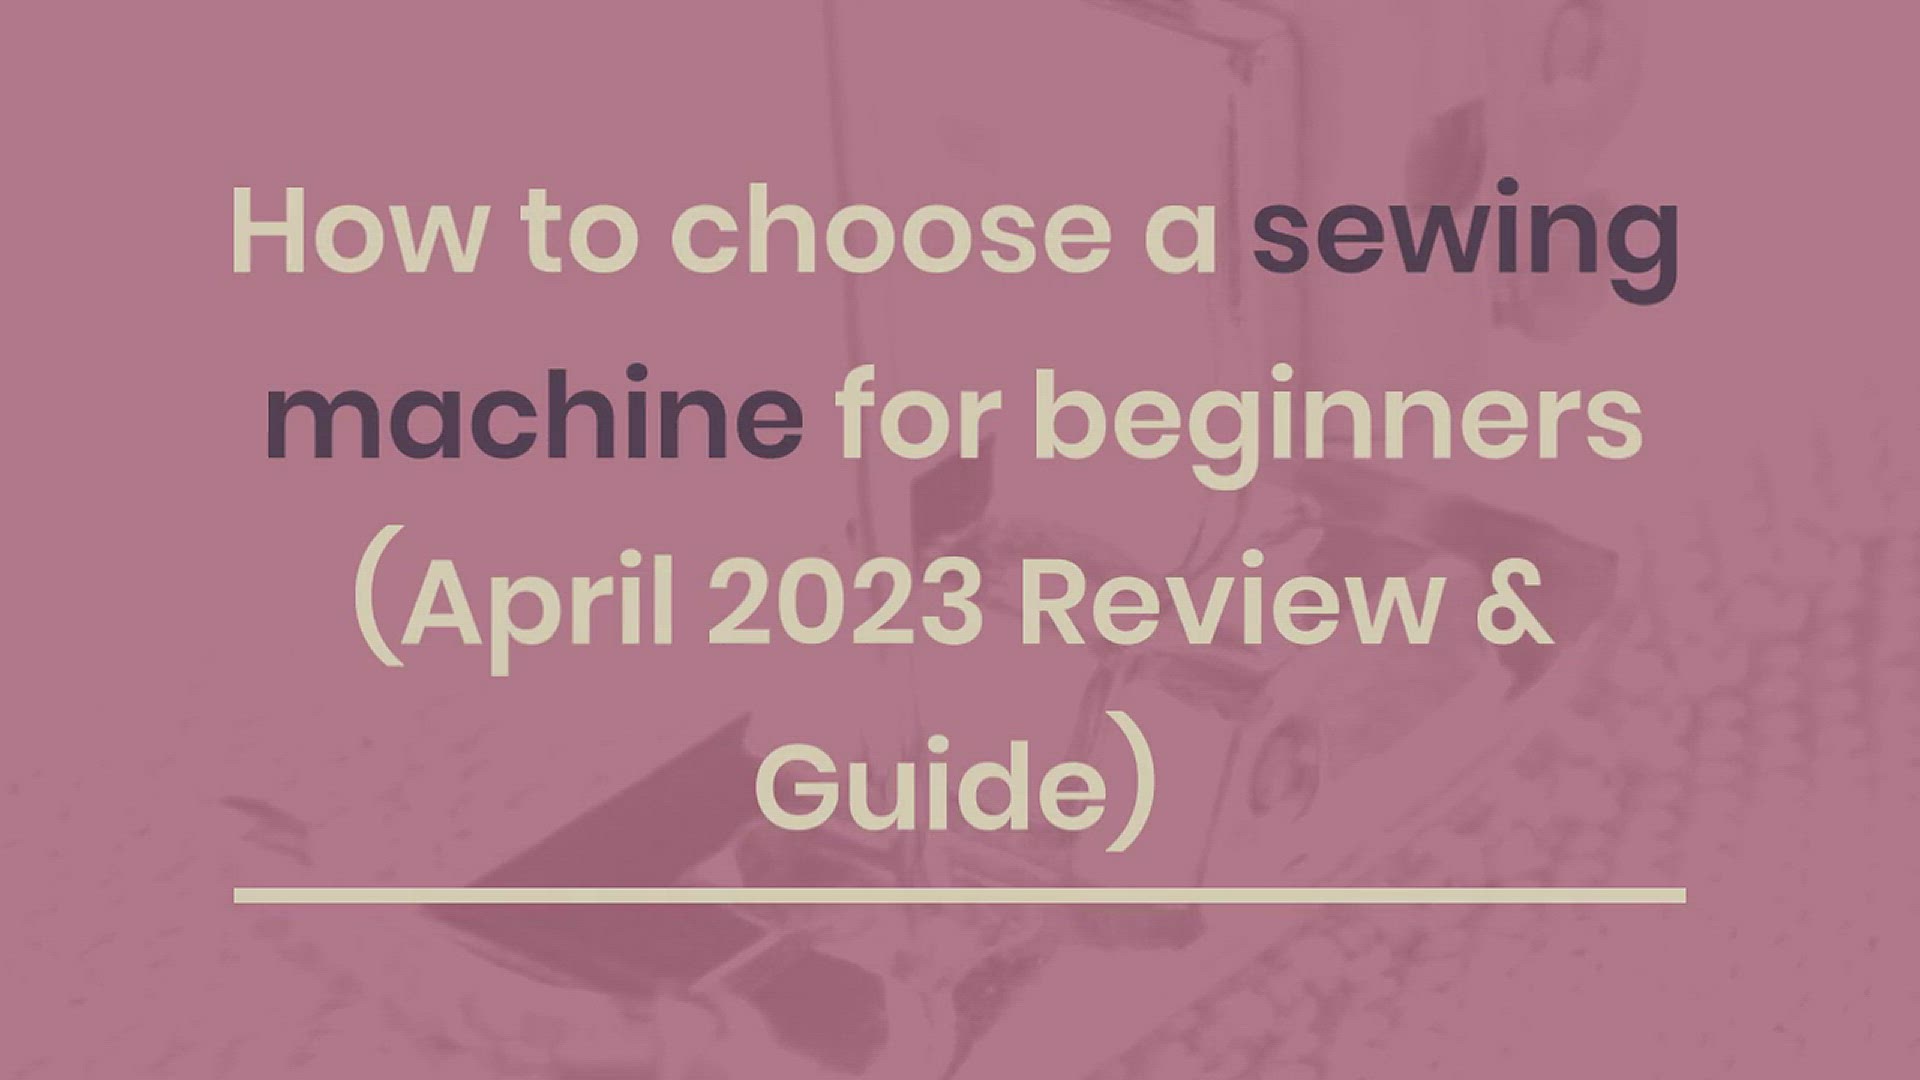 Best Handheld Sewing Machine [Our Reviews and Comparisons]